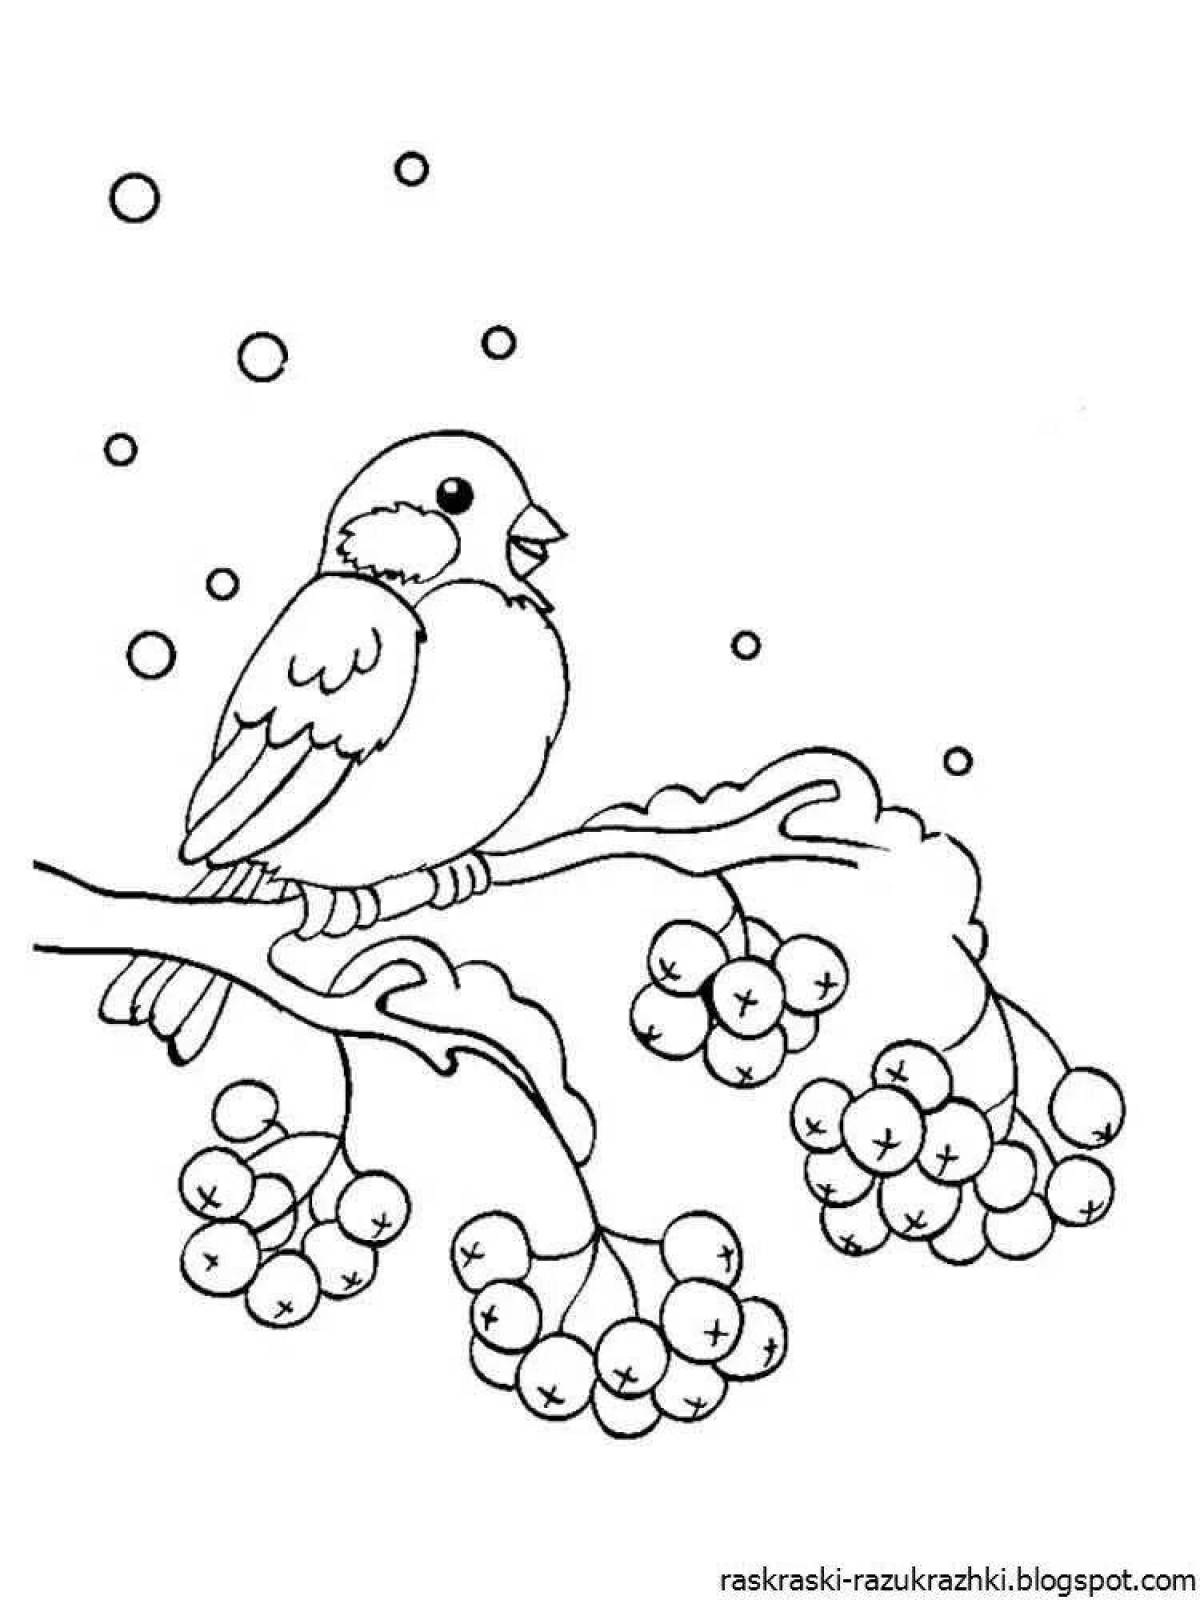 Magic bullfinch picture for kids